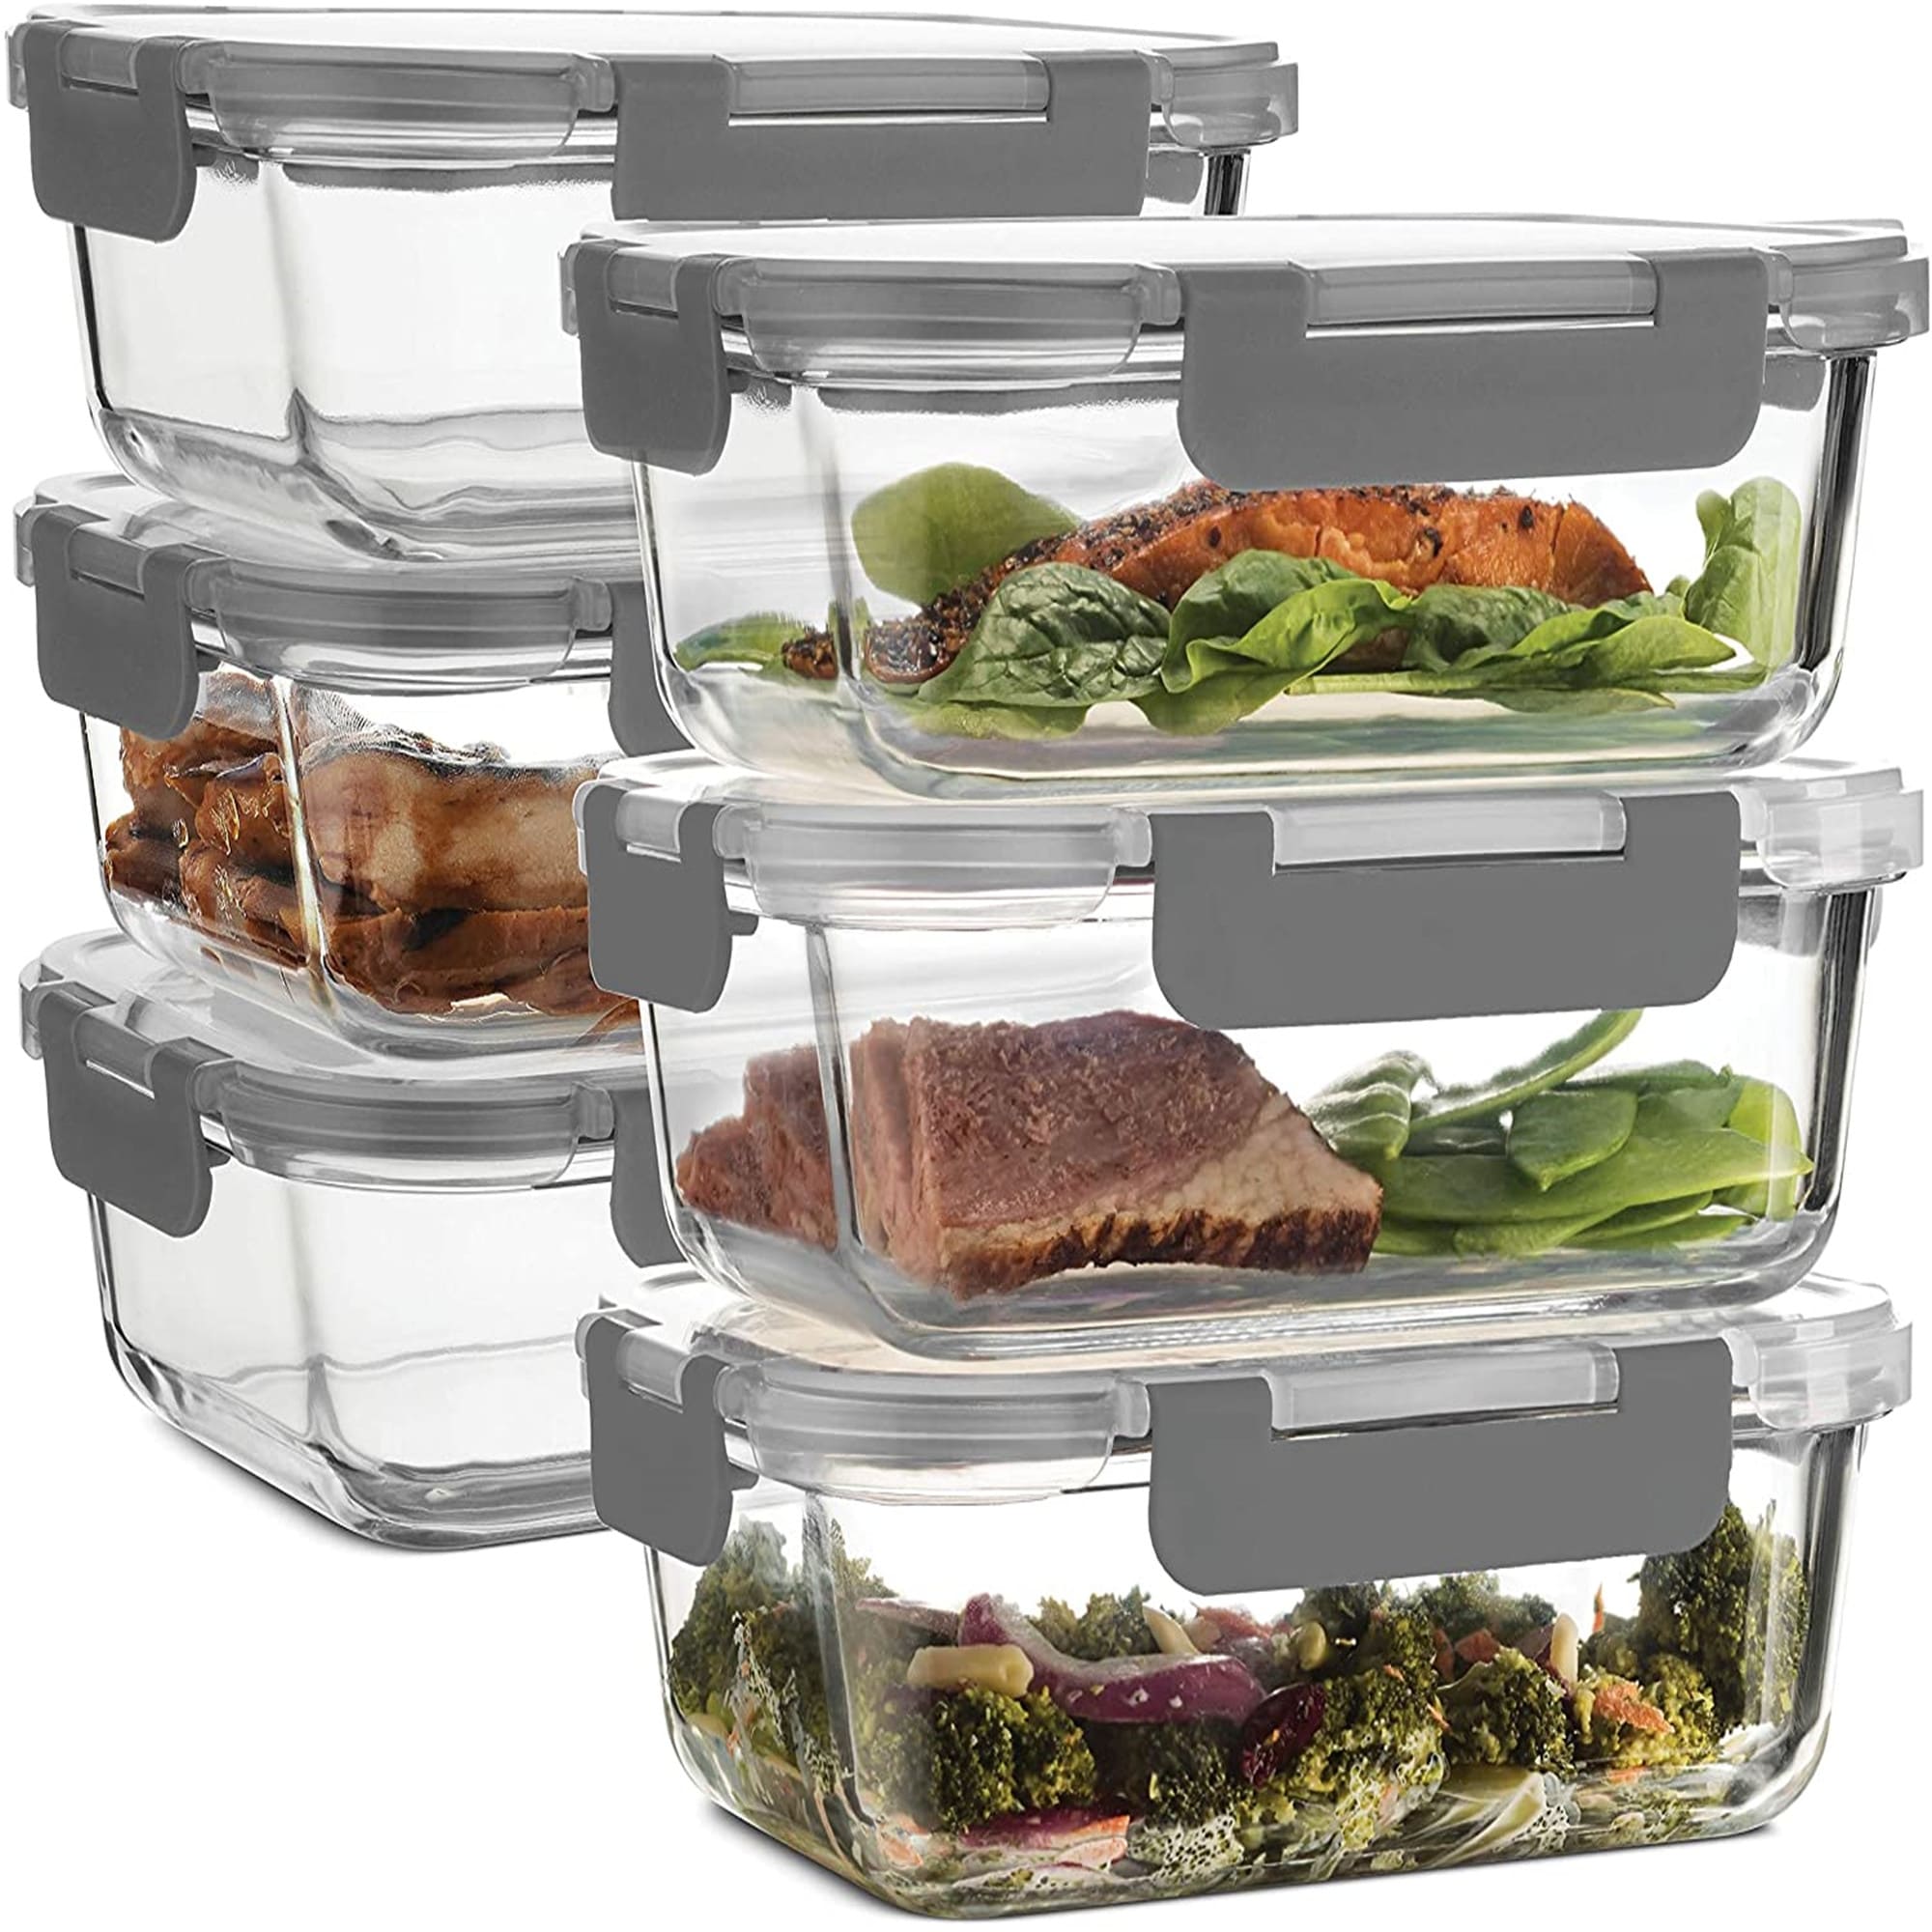 FineDine 6-Piece Superior Glass Food Storage Containers Set, 35oz Capacity  - Newly Innovated Hinged Locking lids - 100% Leakproof Glass Meal-Prep